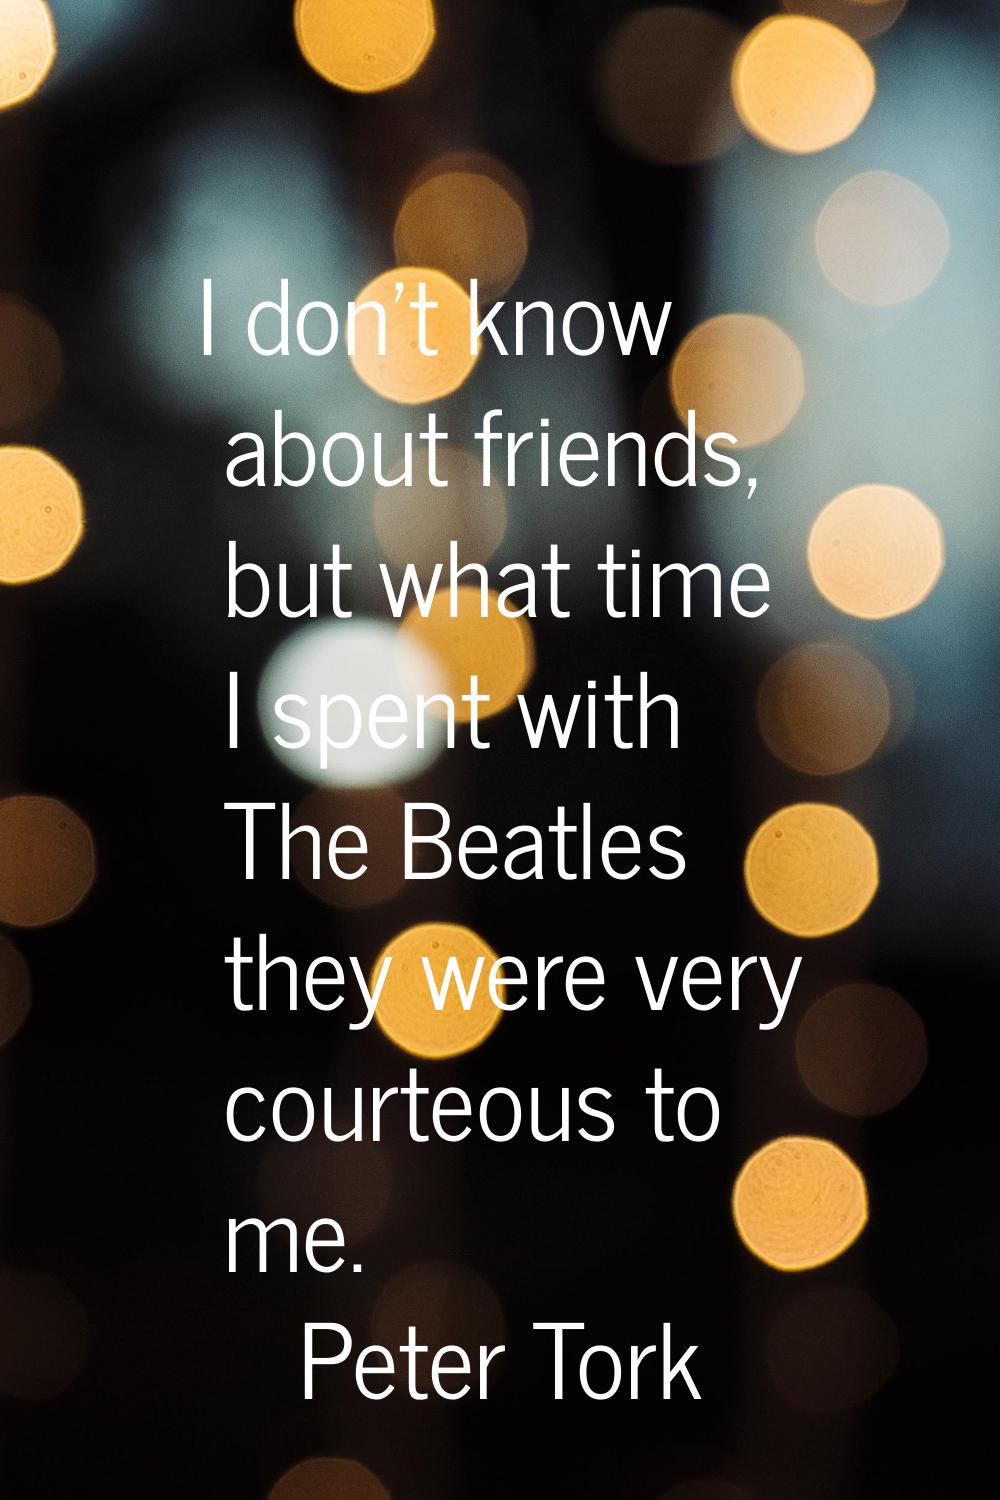 I don't know about friends, but what time I spent with The Beatles they were very courteous to me.